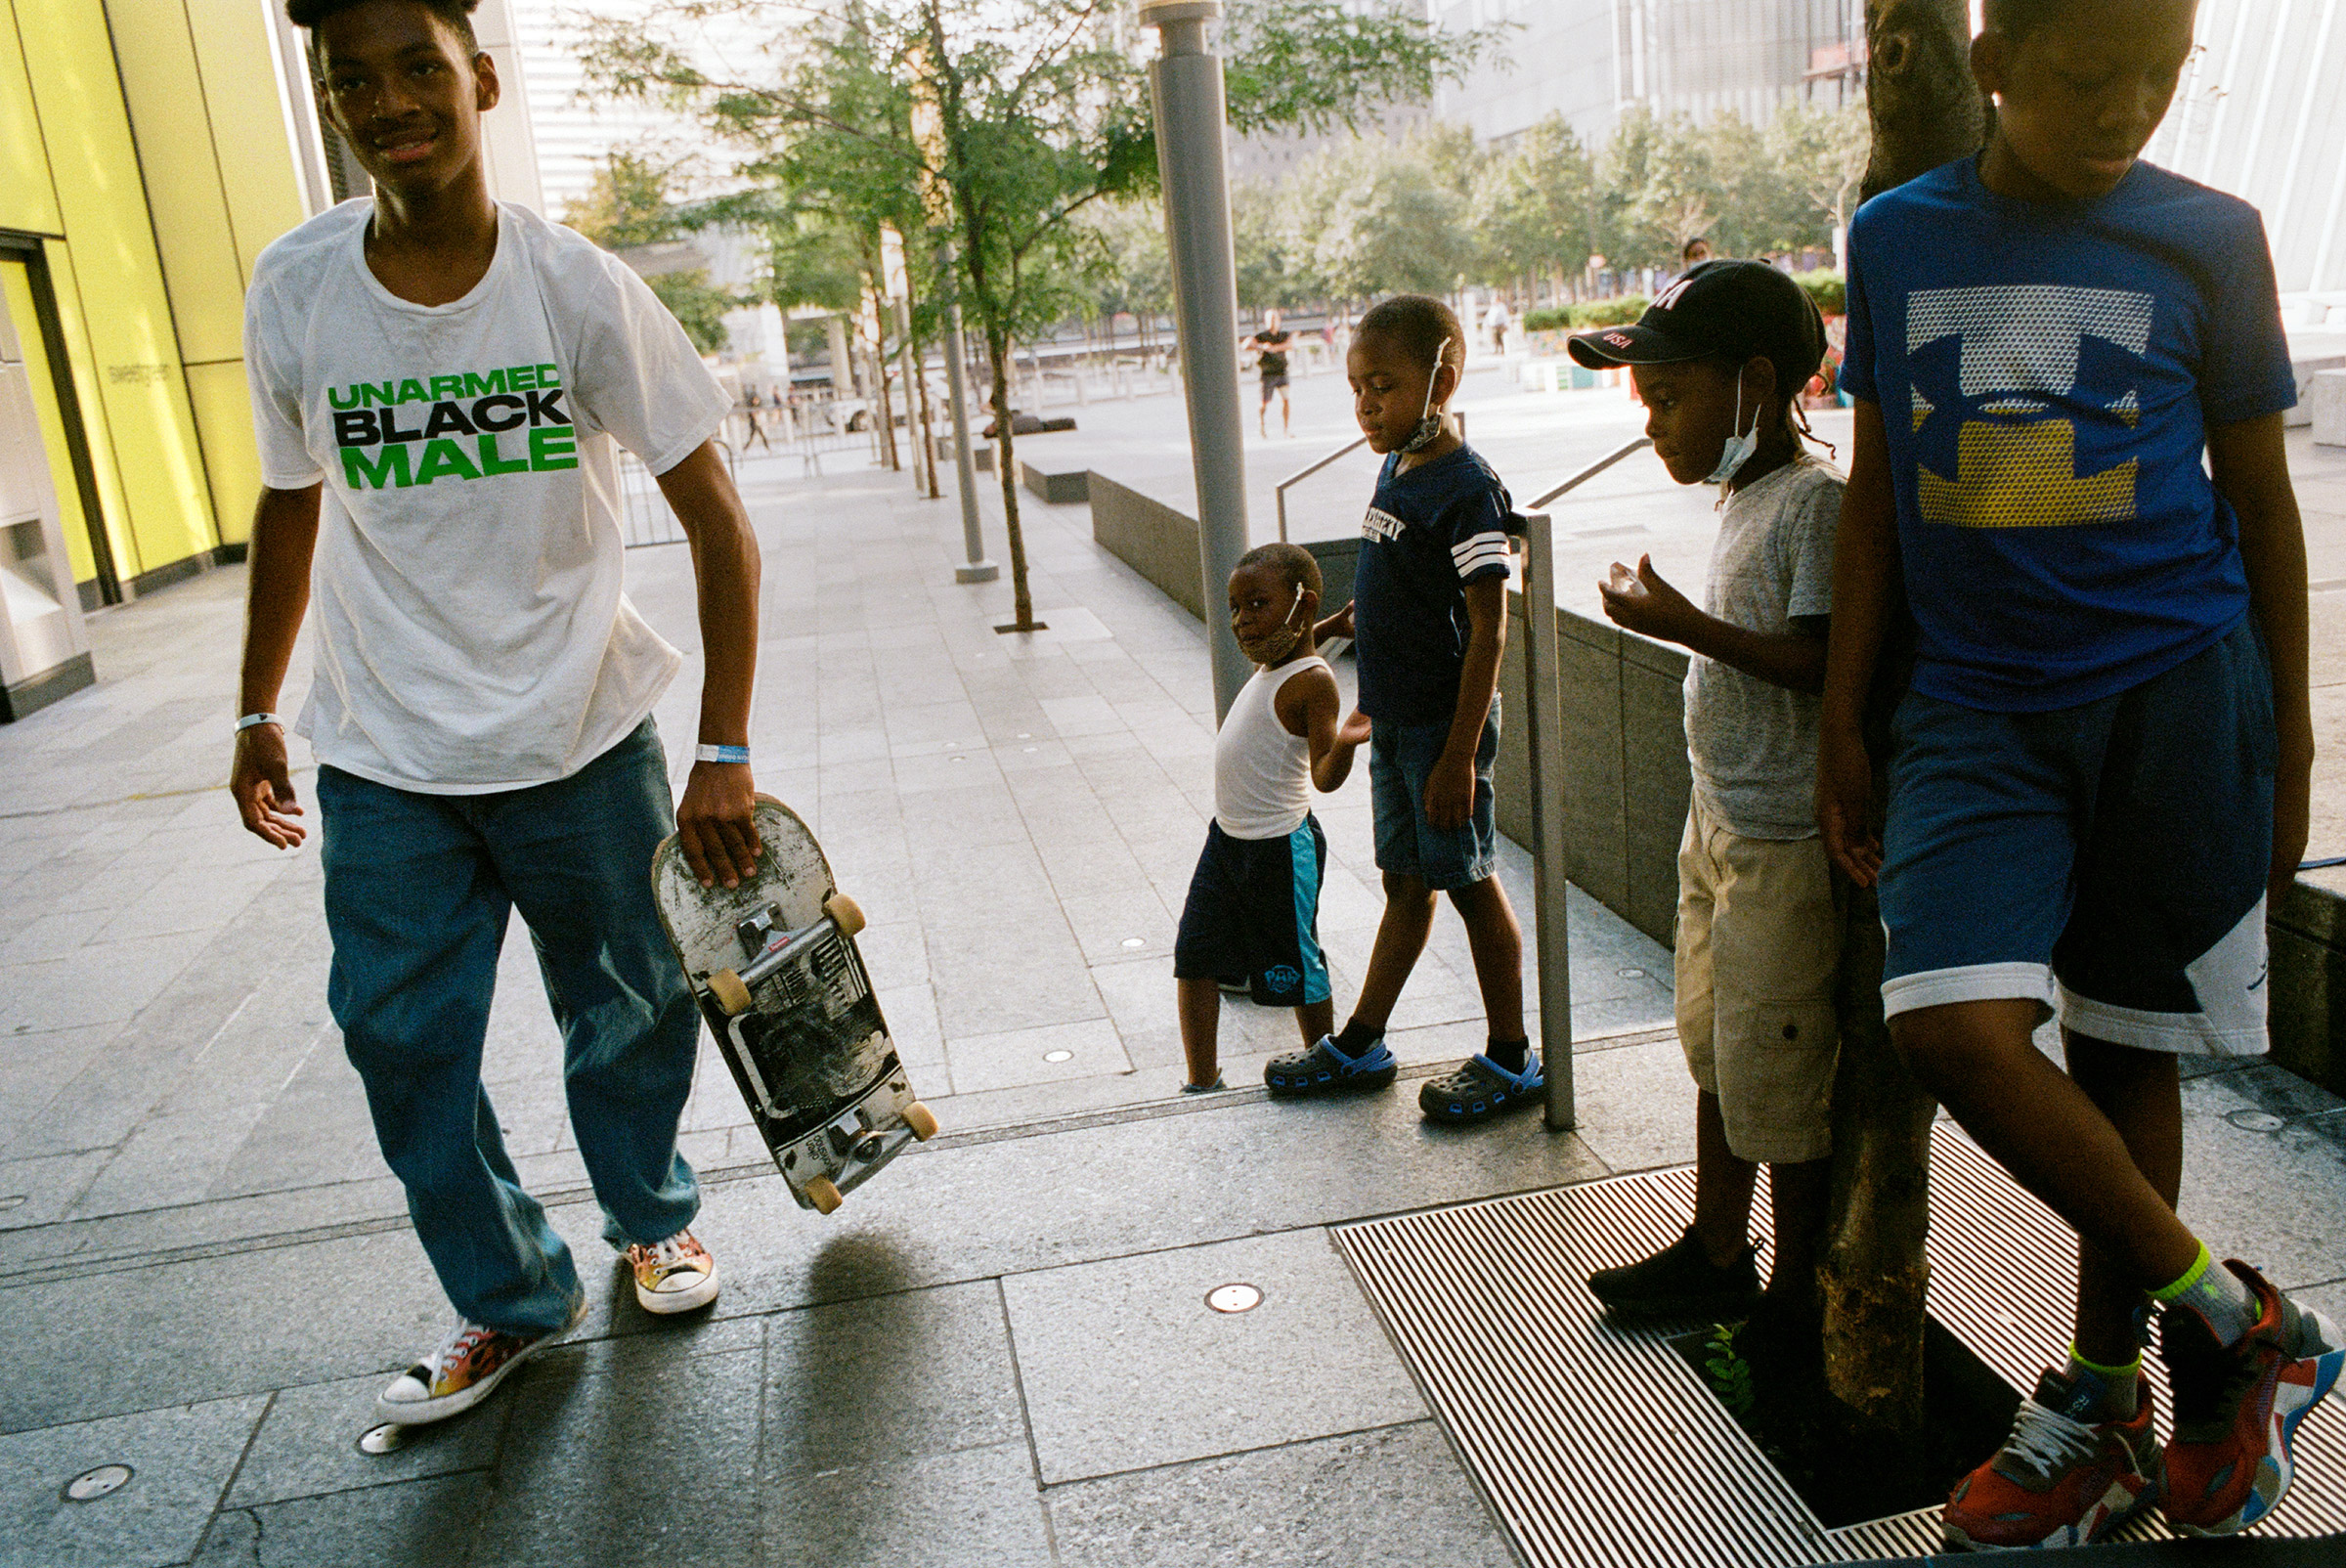 A group of kids admire a young skateboarder near One World Trade, Aug. 26, 2021. (Daniel Arnold for TIME)